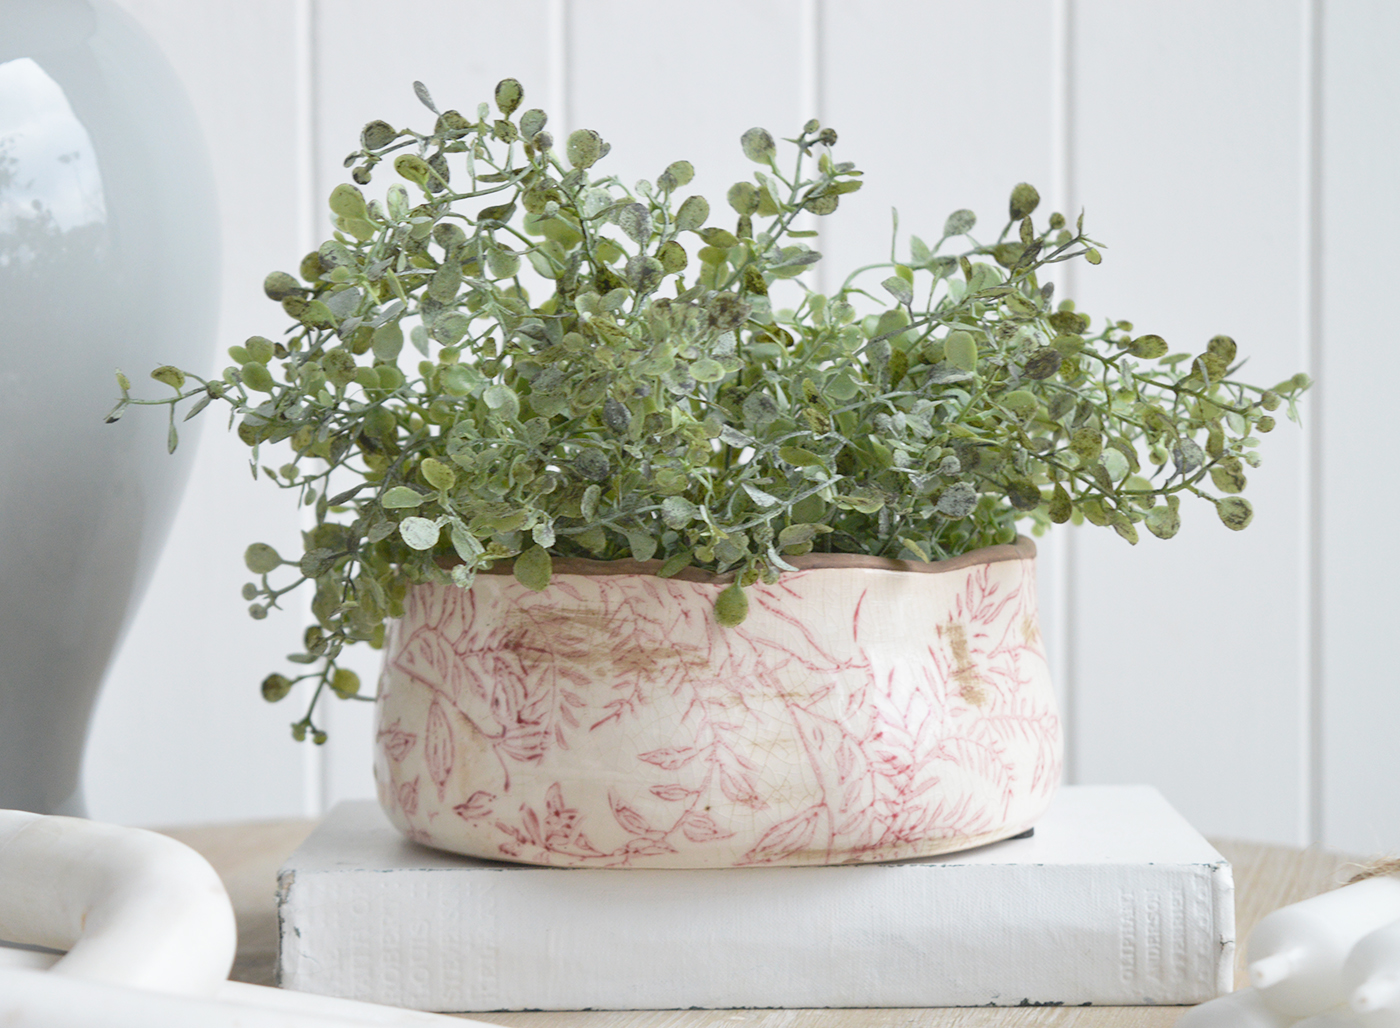 The Tolland vintage ceramic plant pot filled with our faux Eucalyptus Gunnii